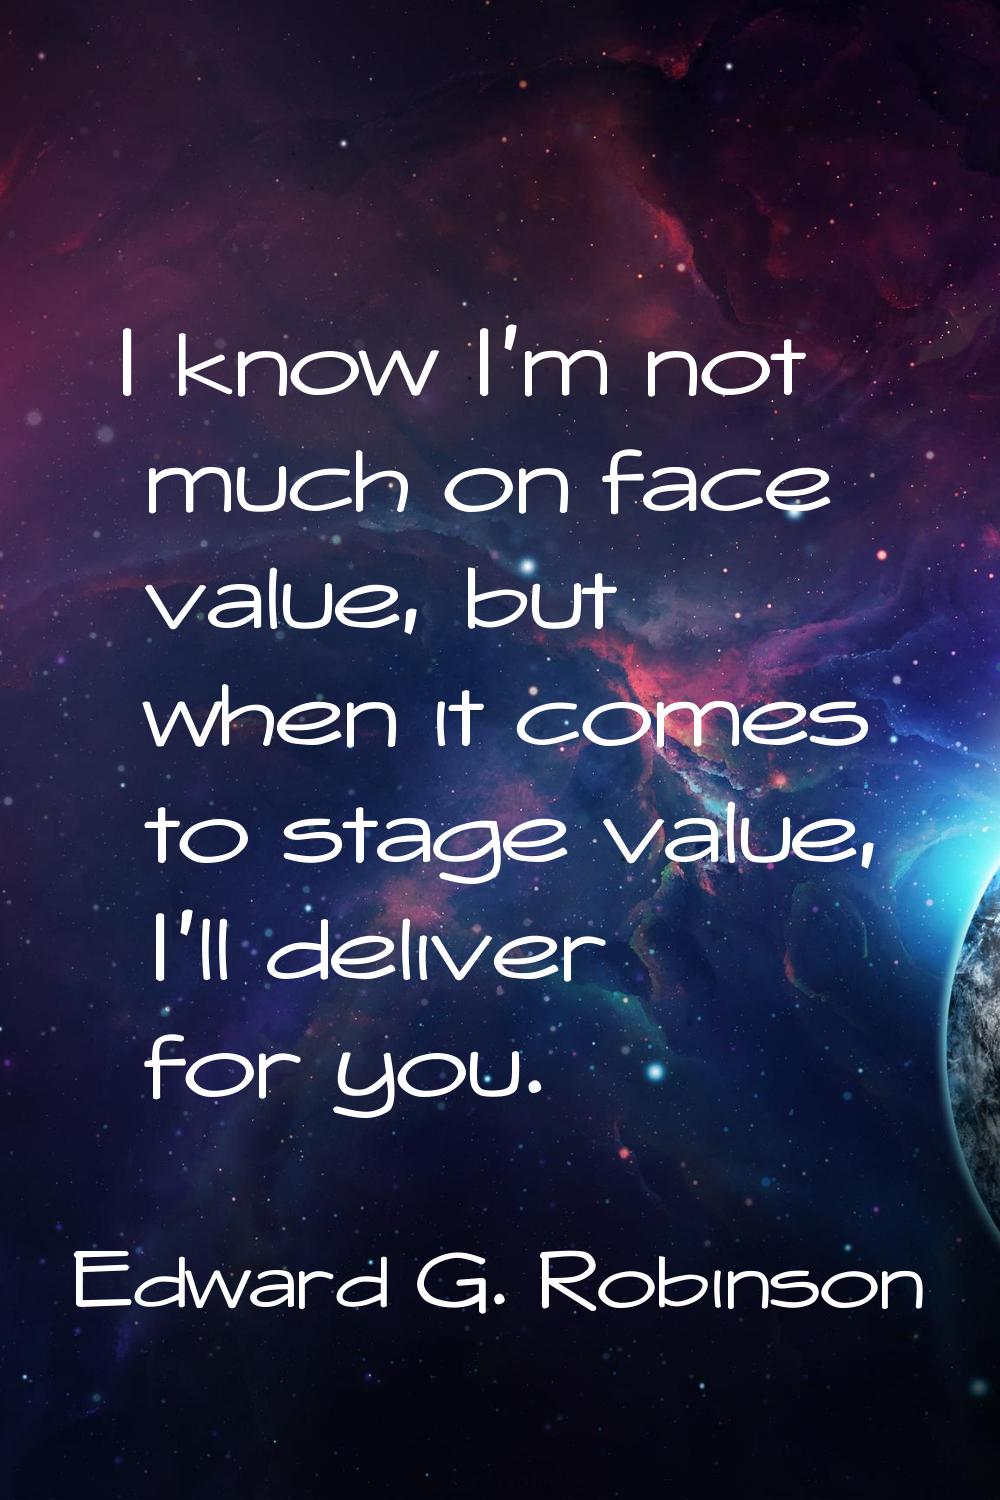 I know I'm not much on face value, but when it comes to stage value, I'll deliver for you.